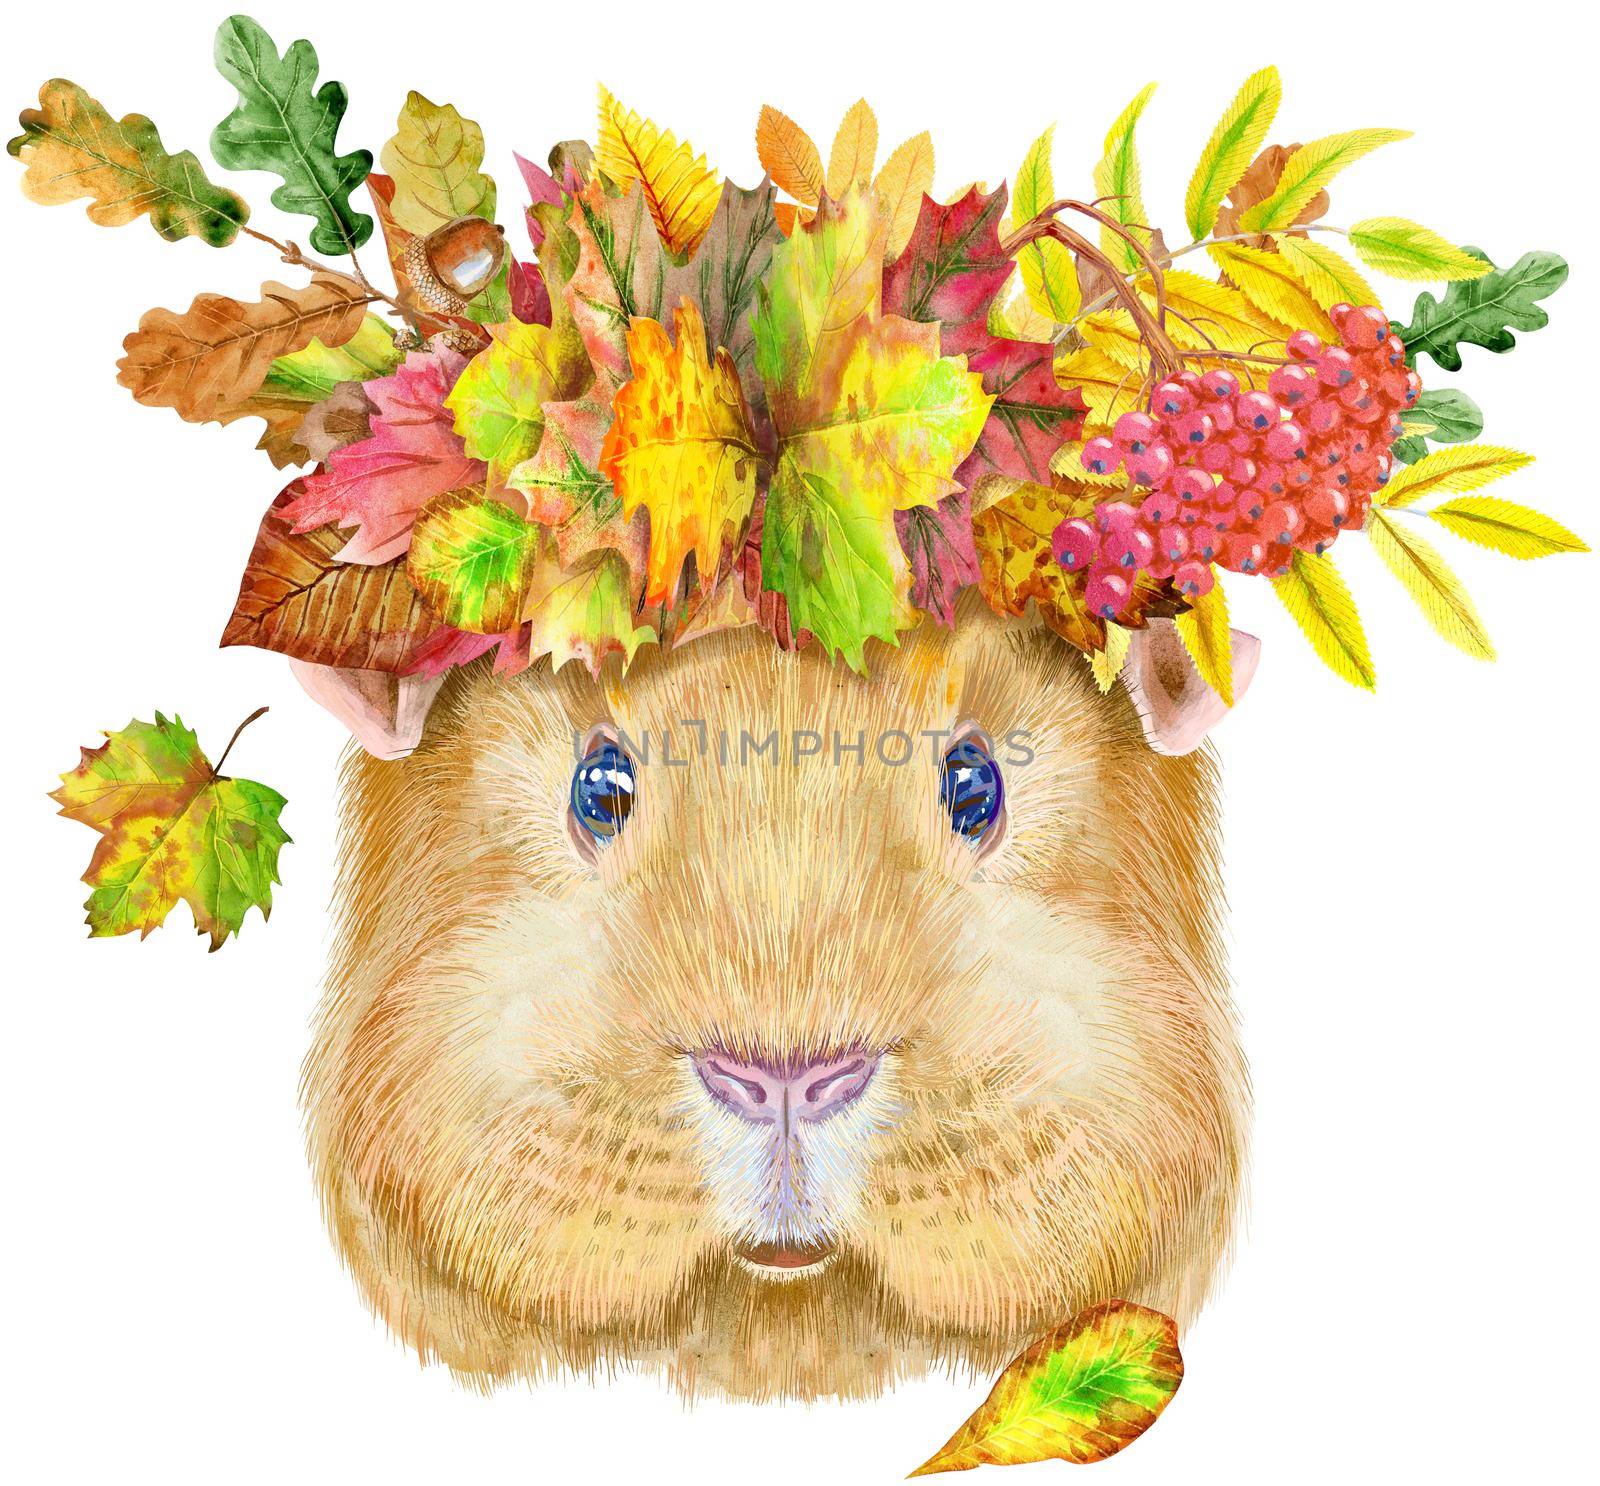 Guinea pig with wreath of autumn leaves. Pig for T-shirt graphics. Watercolor Self guinea pig illustration